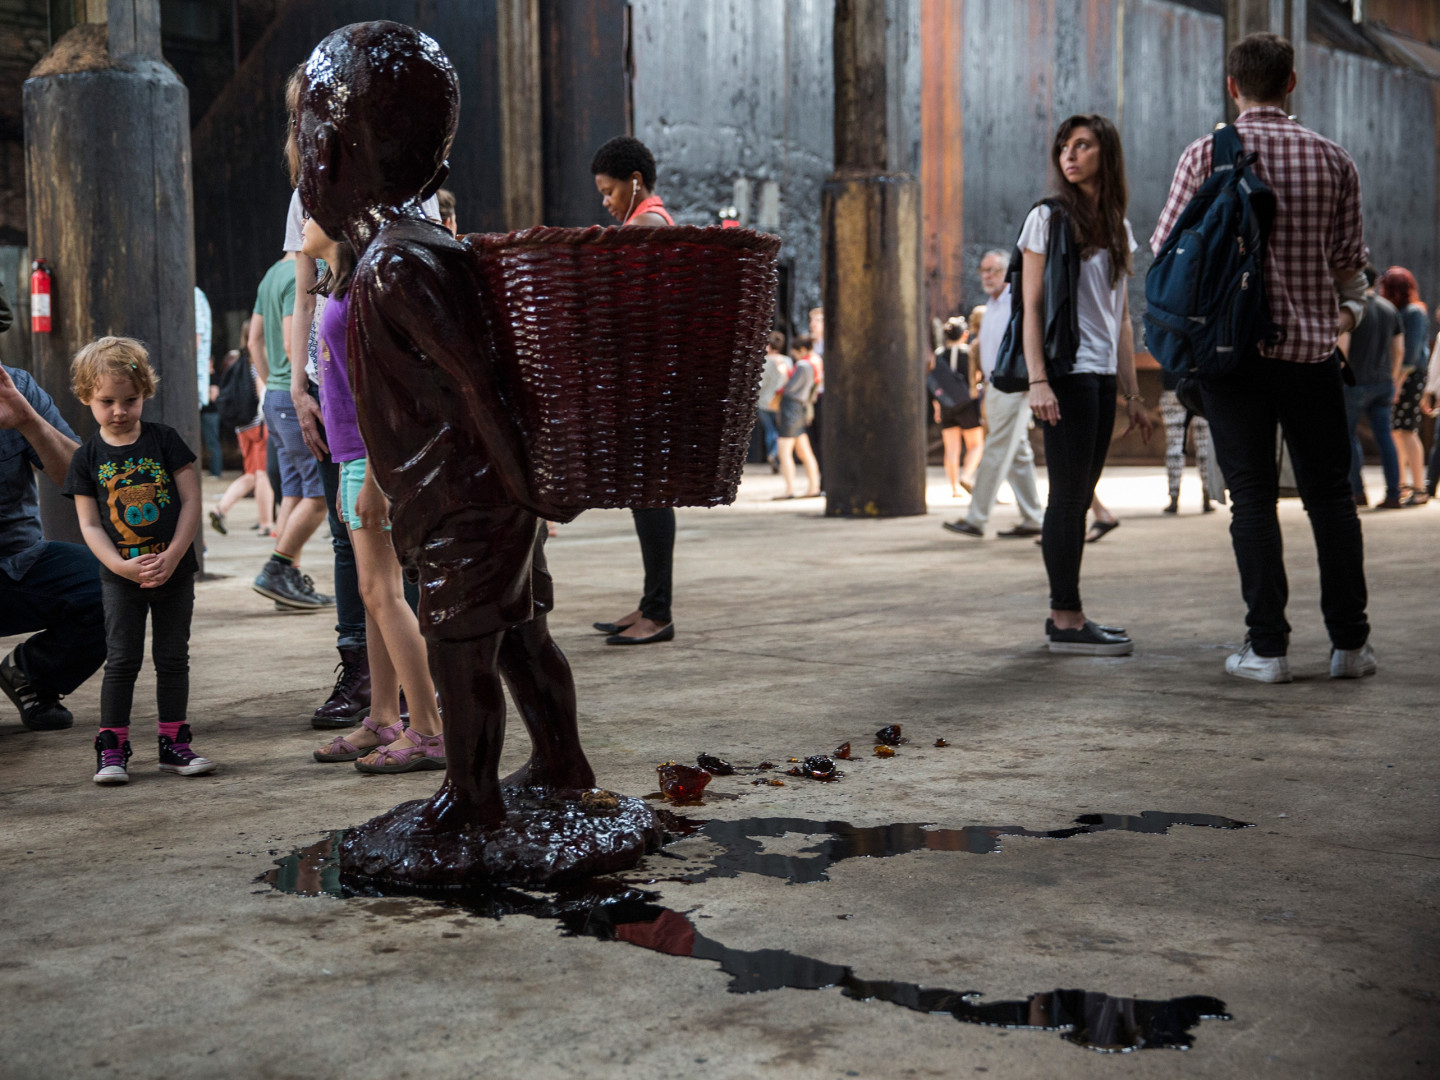 Walker's candy boy sculptures started melting fast in the non-climate-controlled factory, and the result looks a lot like blood